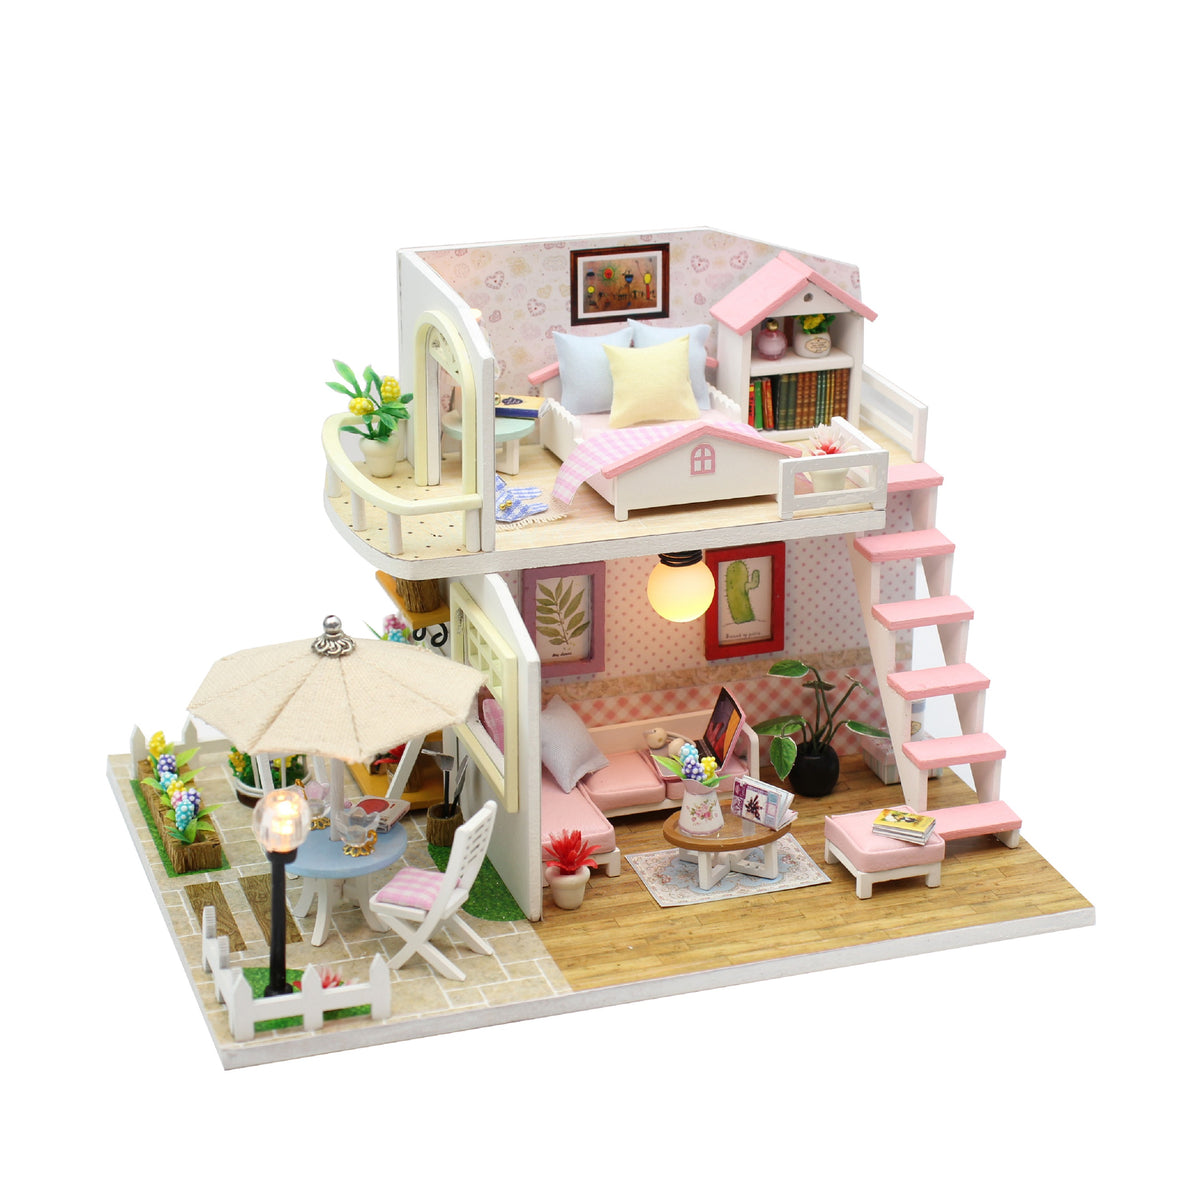 1:24 Miniature Dollhouse DIY Kit – Pink 2-Story Home with Patio - with ...